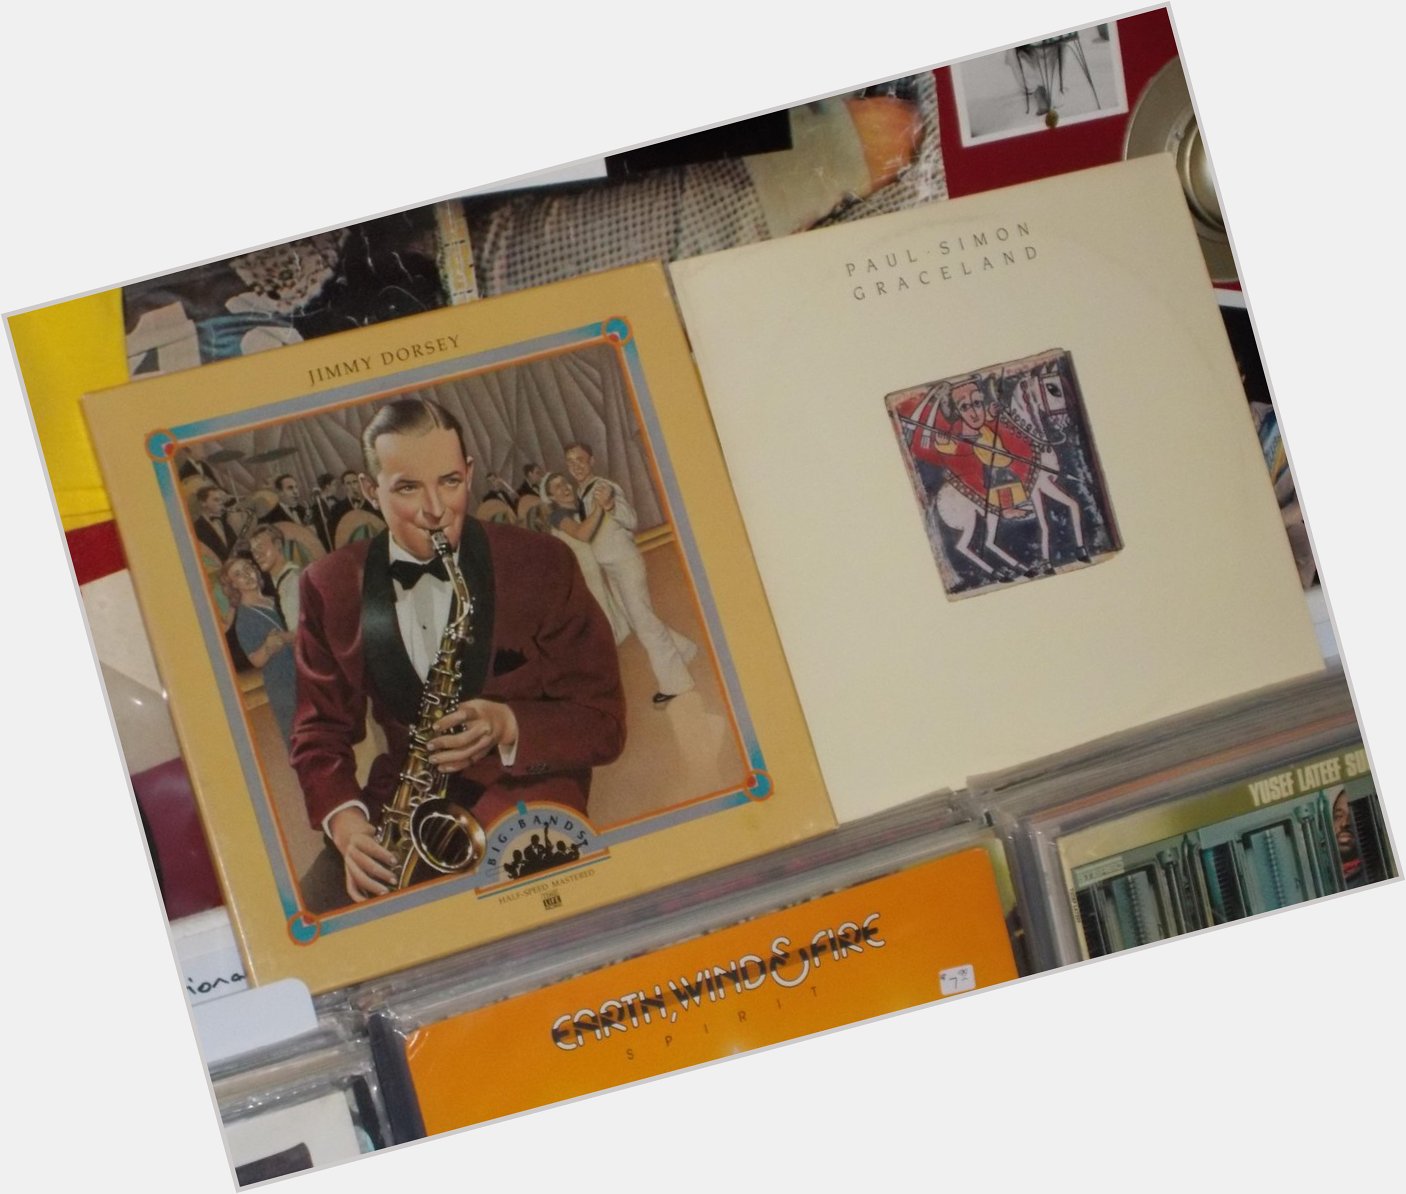 Happy Birthday to the late Bob Eberly of Jimmy Dorsey Band and Jon Faddis who played on this Paul Simon lp 